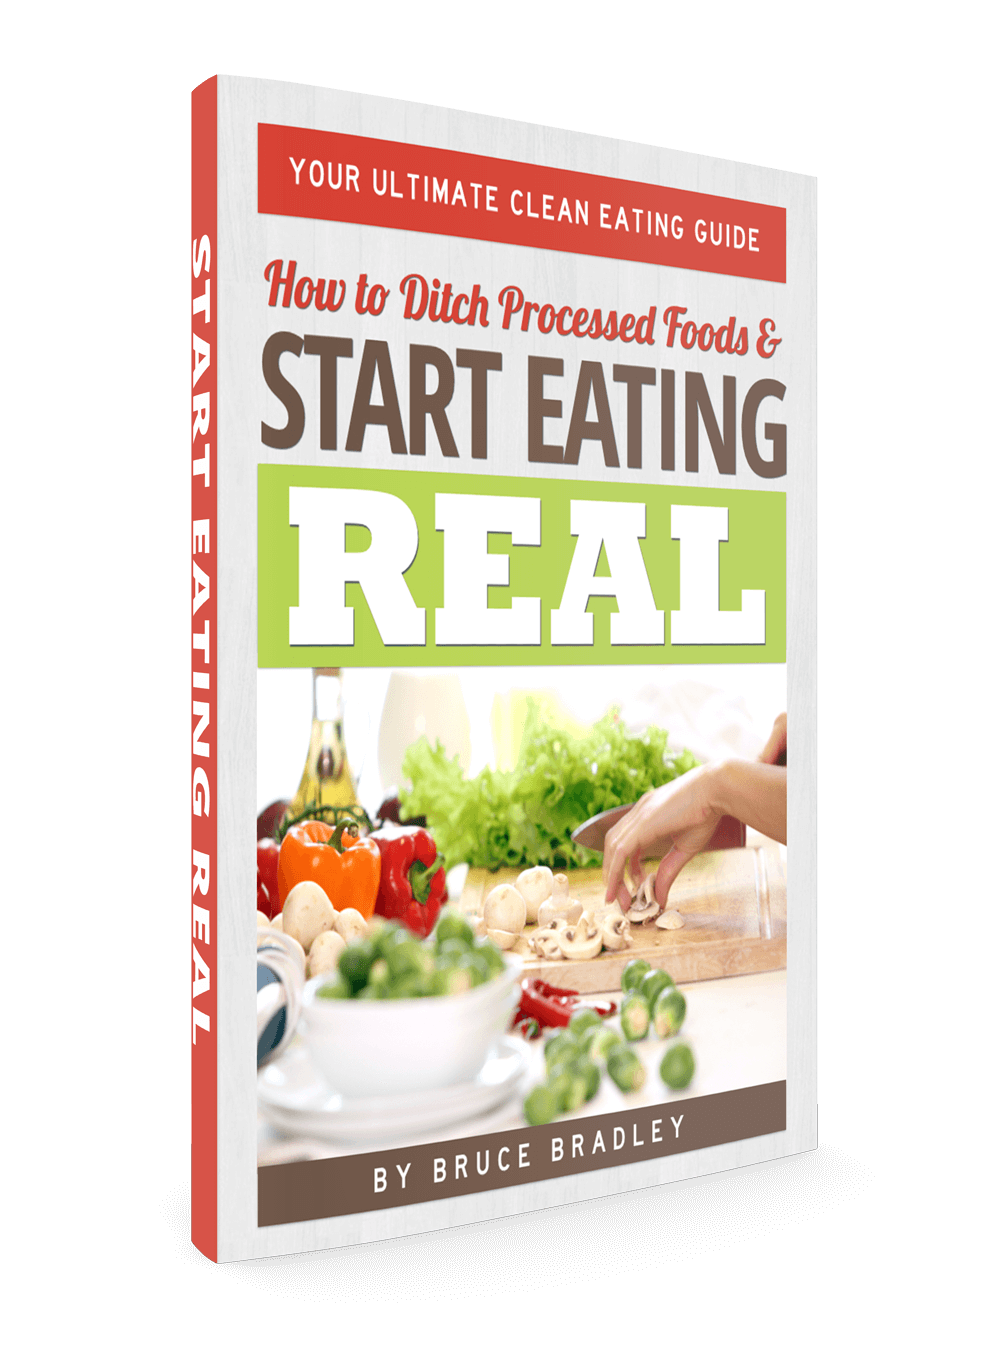 In Bruce Bradley'S Ultimate Clean Eating Guide This Former Processed Food Marketing Executive Shares Why He Quit Processed Foods, How He Did It, And Outlines Tips And Steps You Can Take To Lead A Happier, Healthier Life!